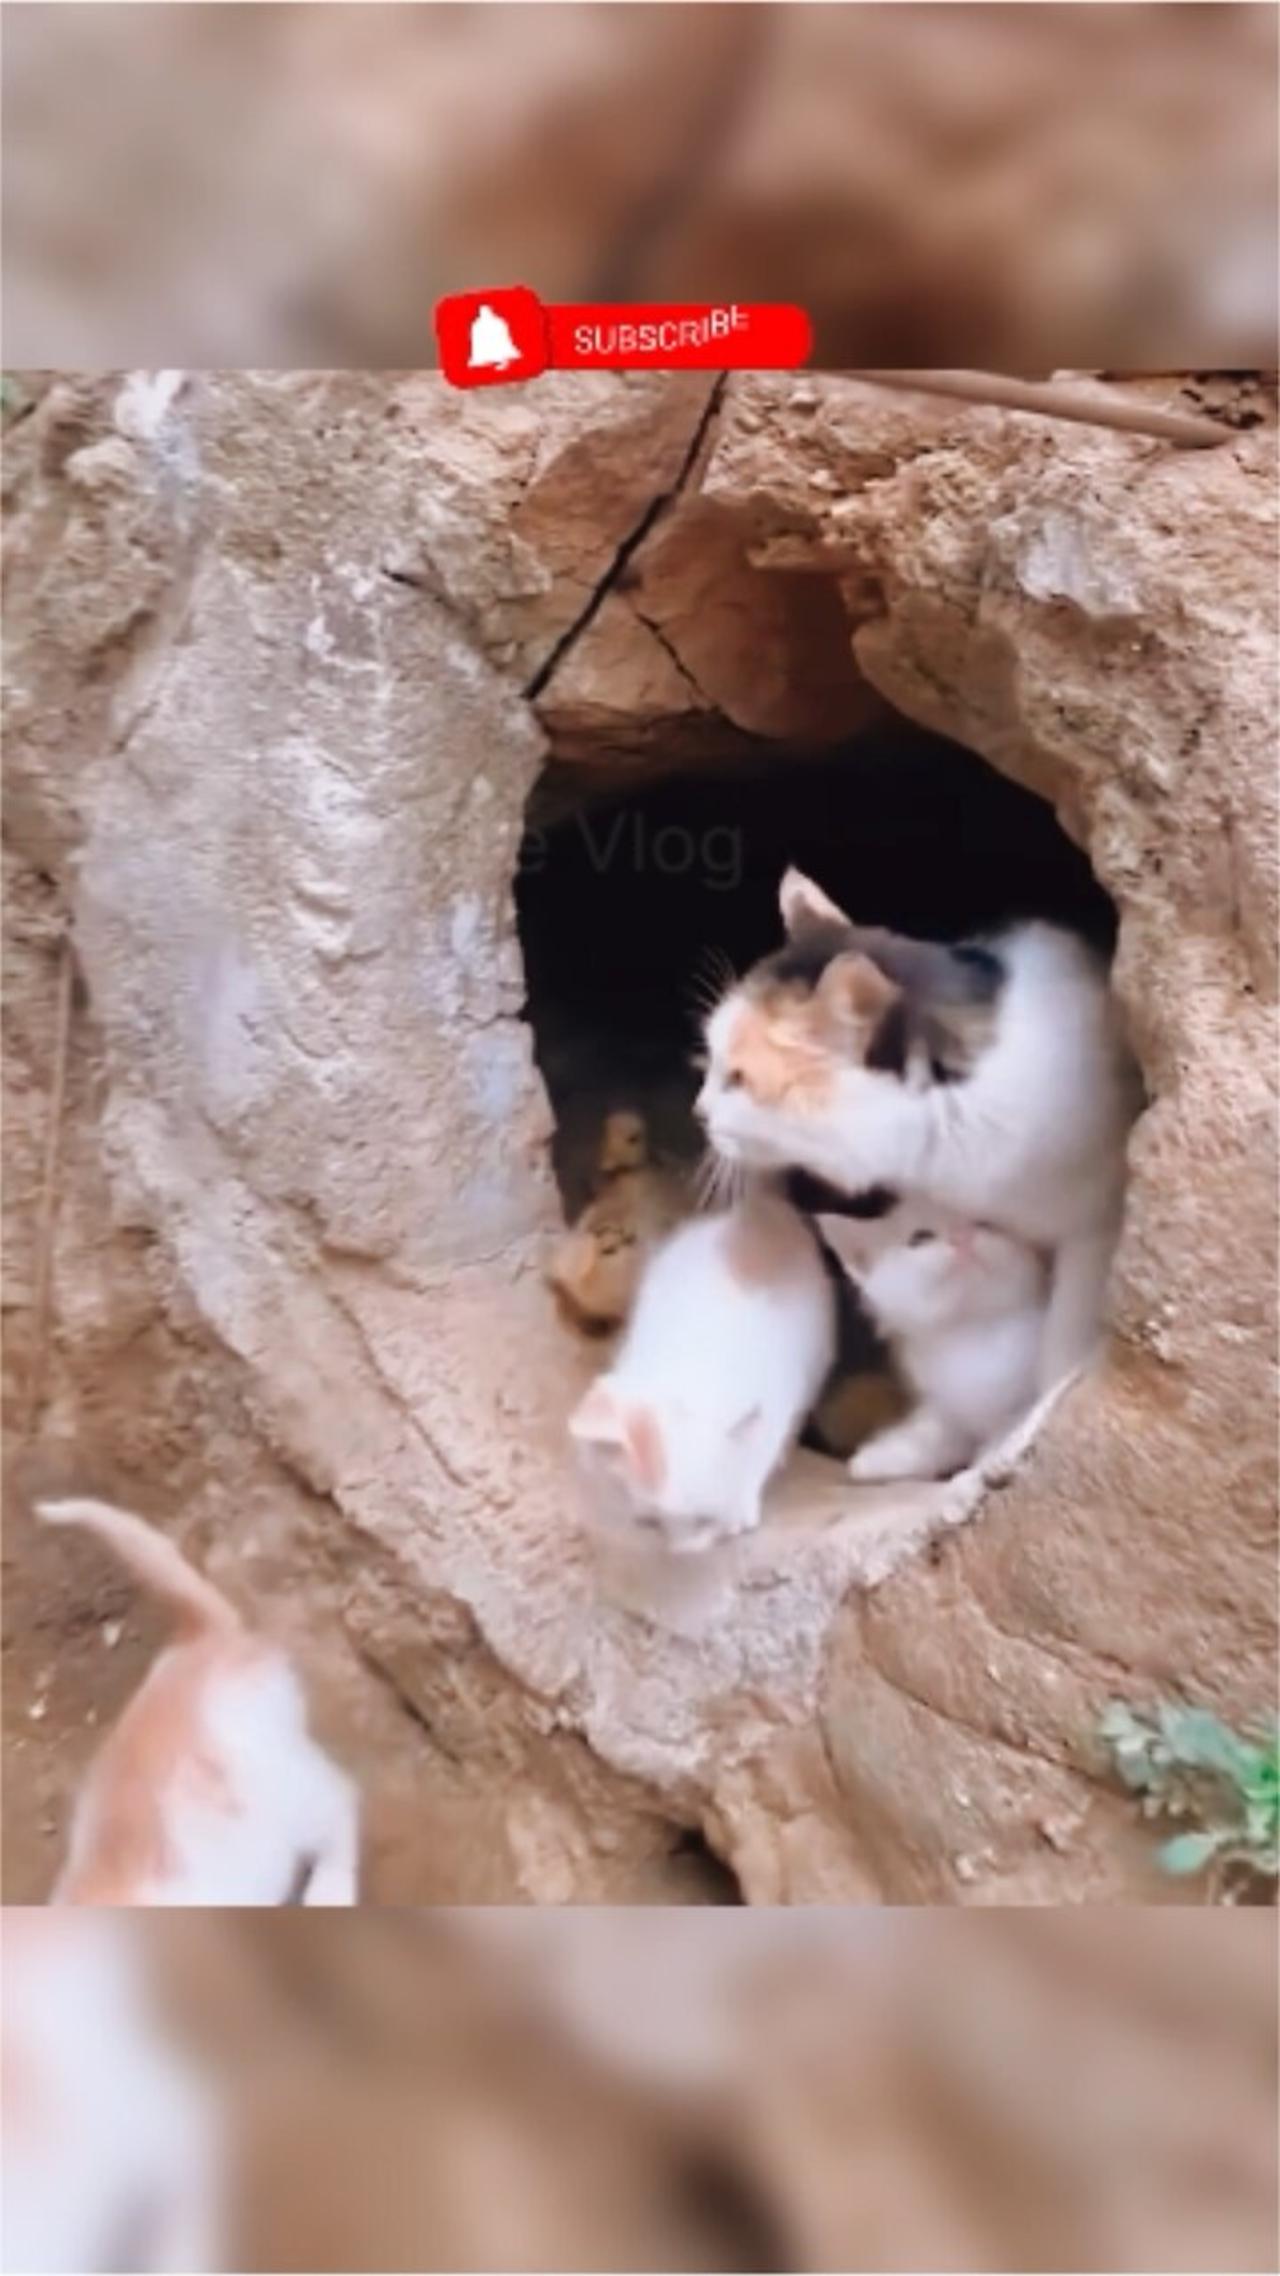 The Great Escape: Mother Cat Leads Her Babies to Freedom